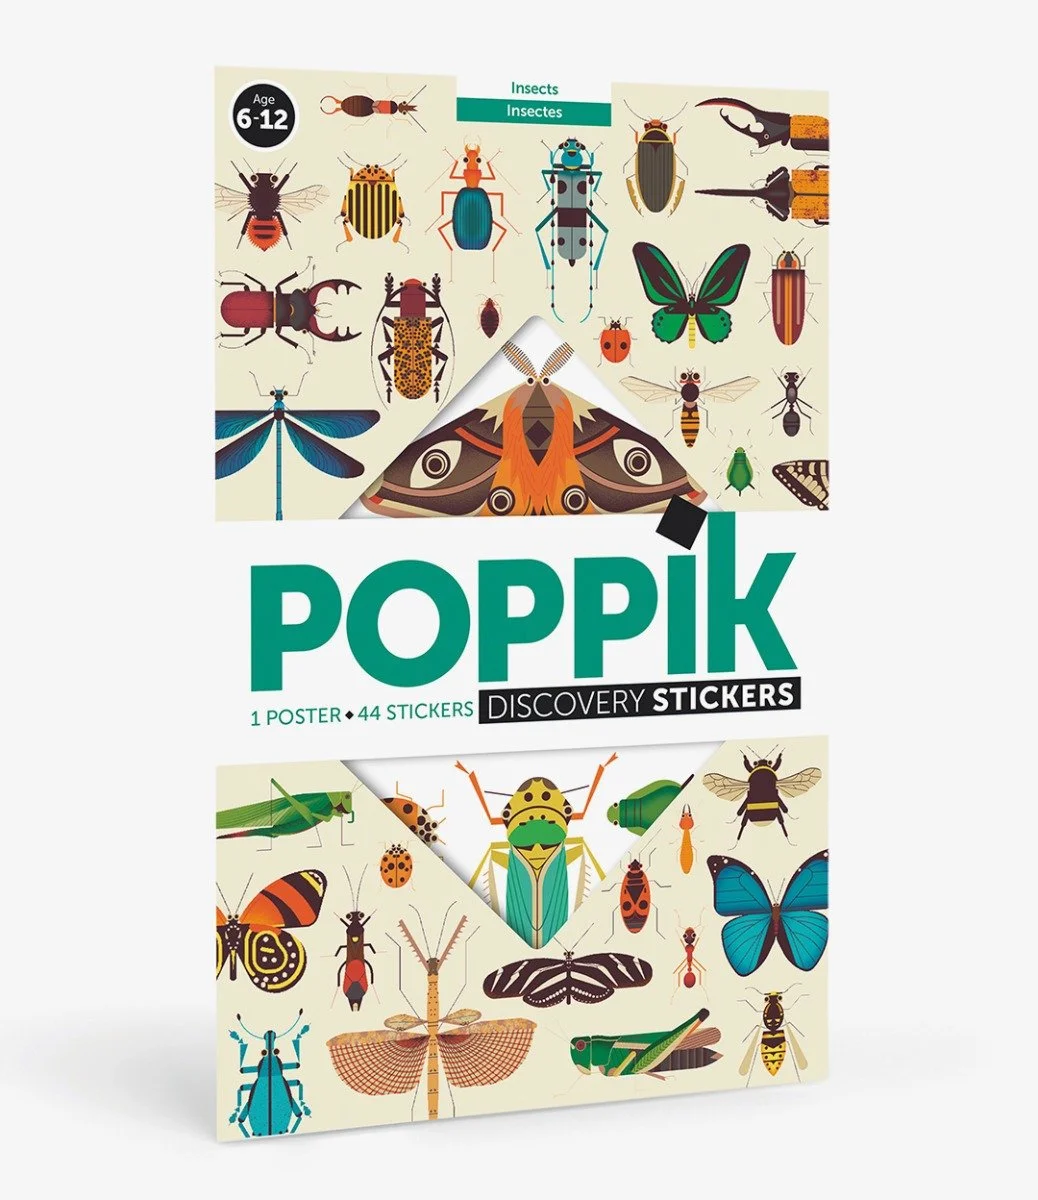 Sticker Poster Discovery - Insects By Poppik